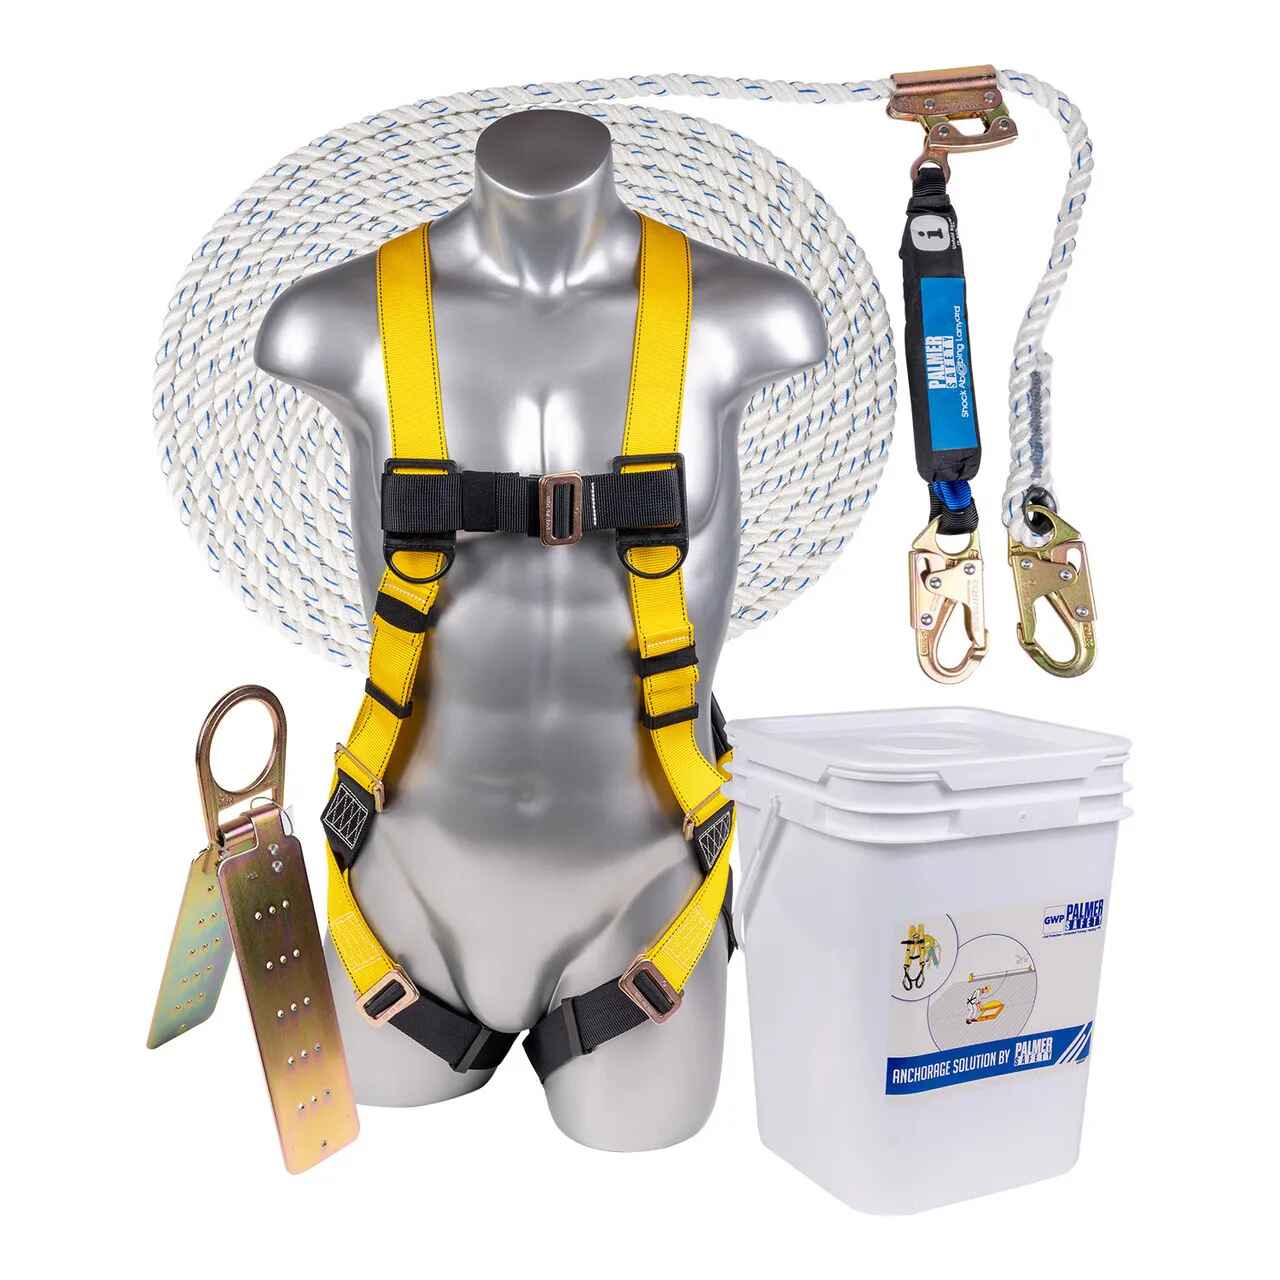 Construction Safety Harness 5 Point, Padded Back & Grommet Legs